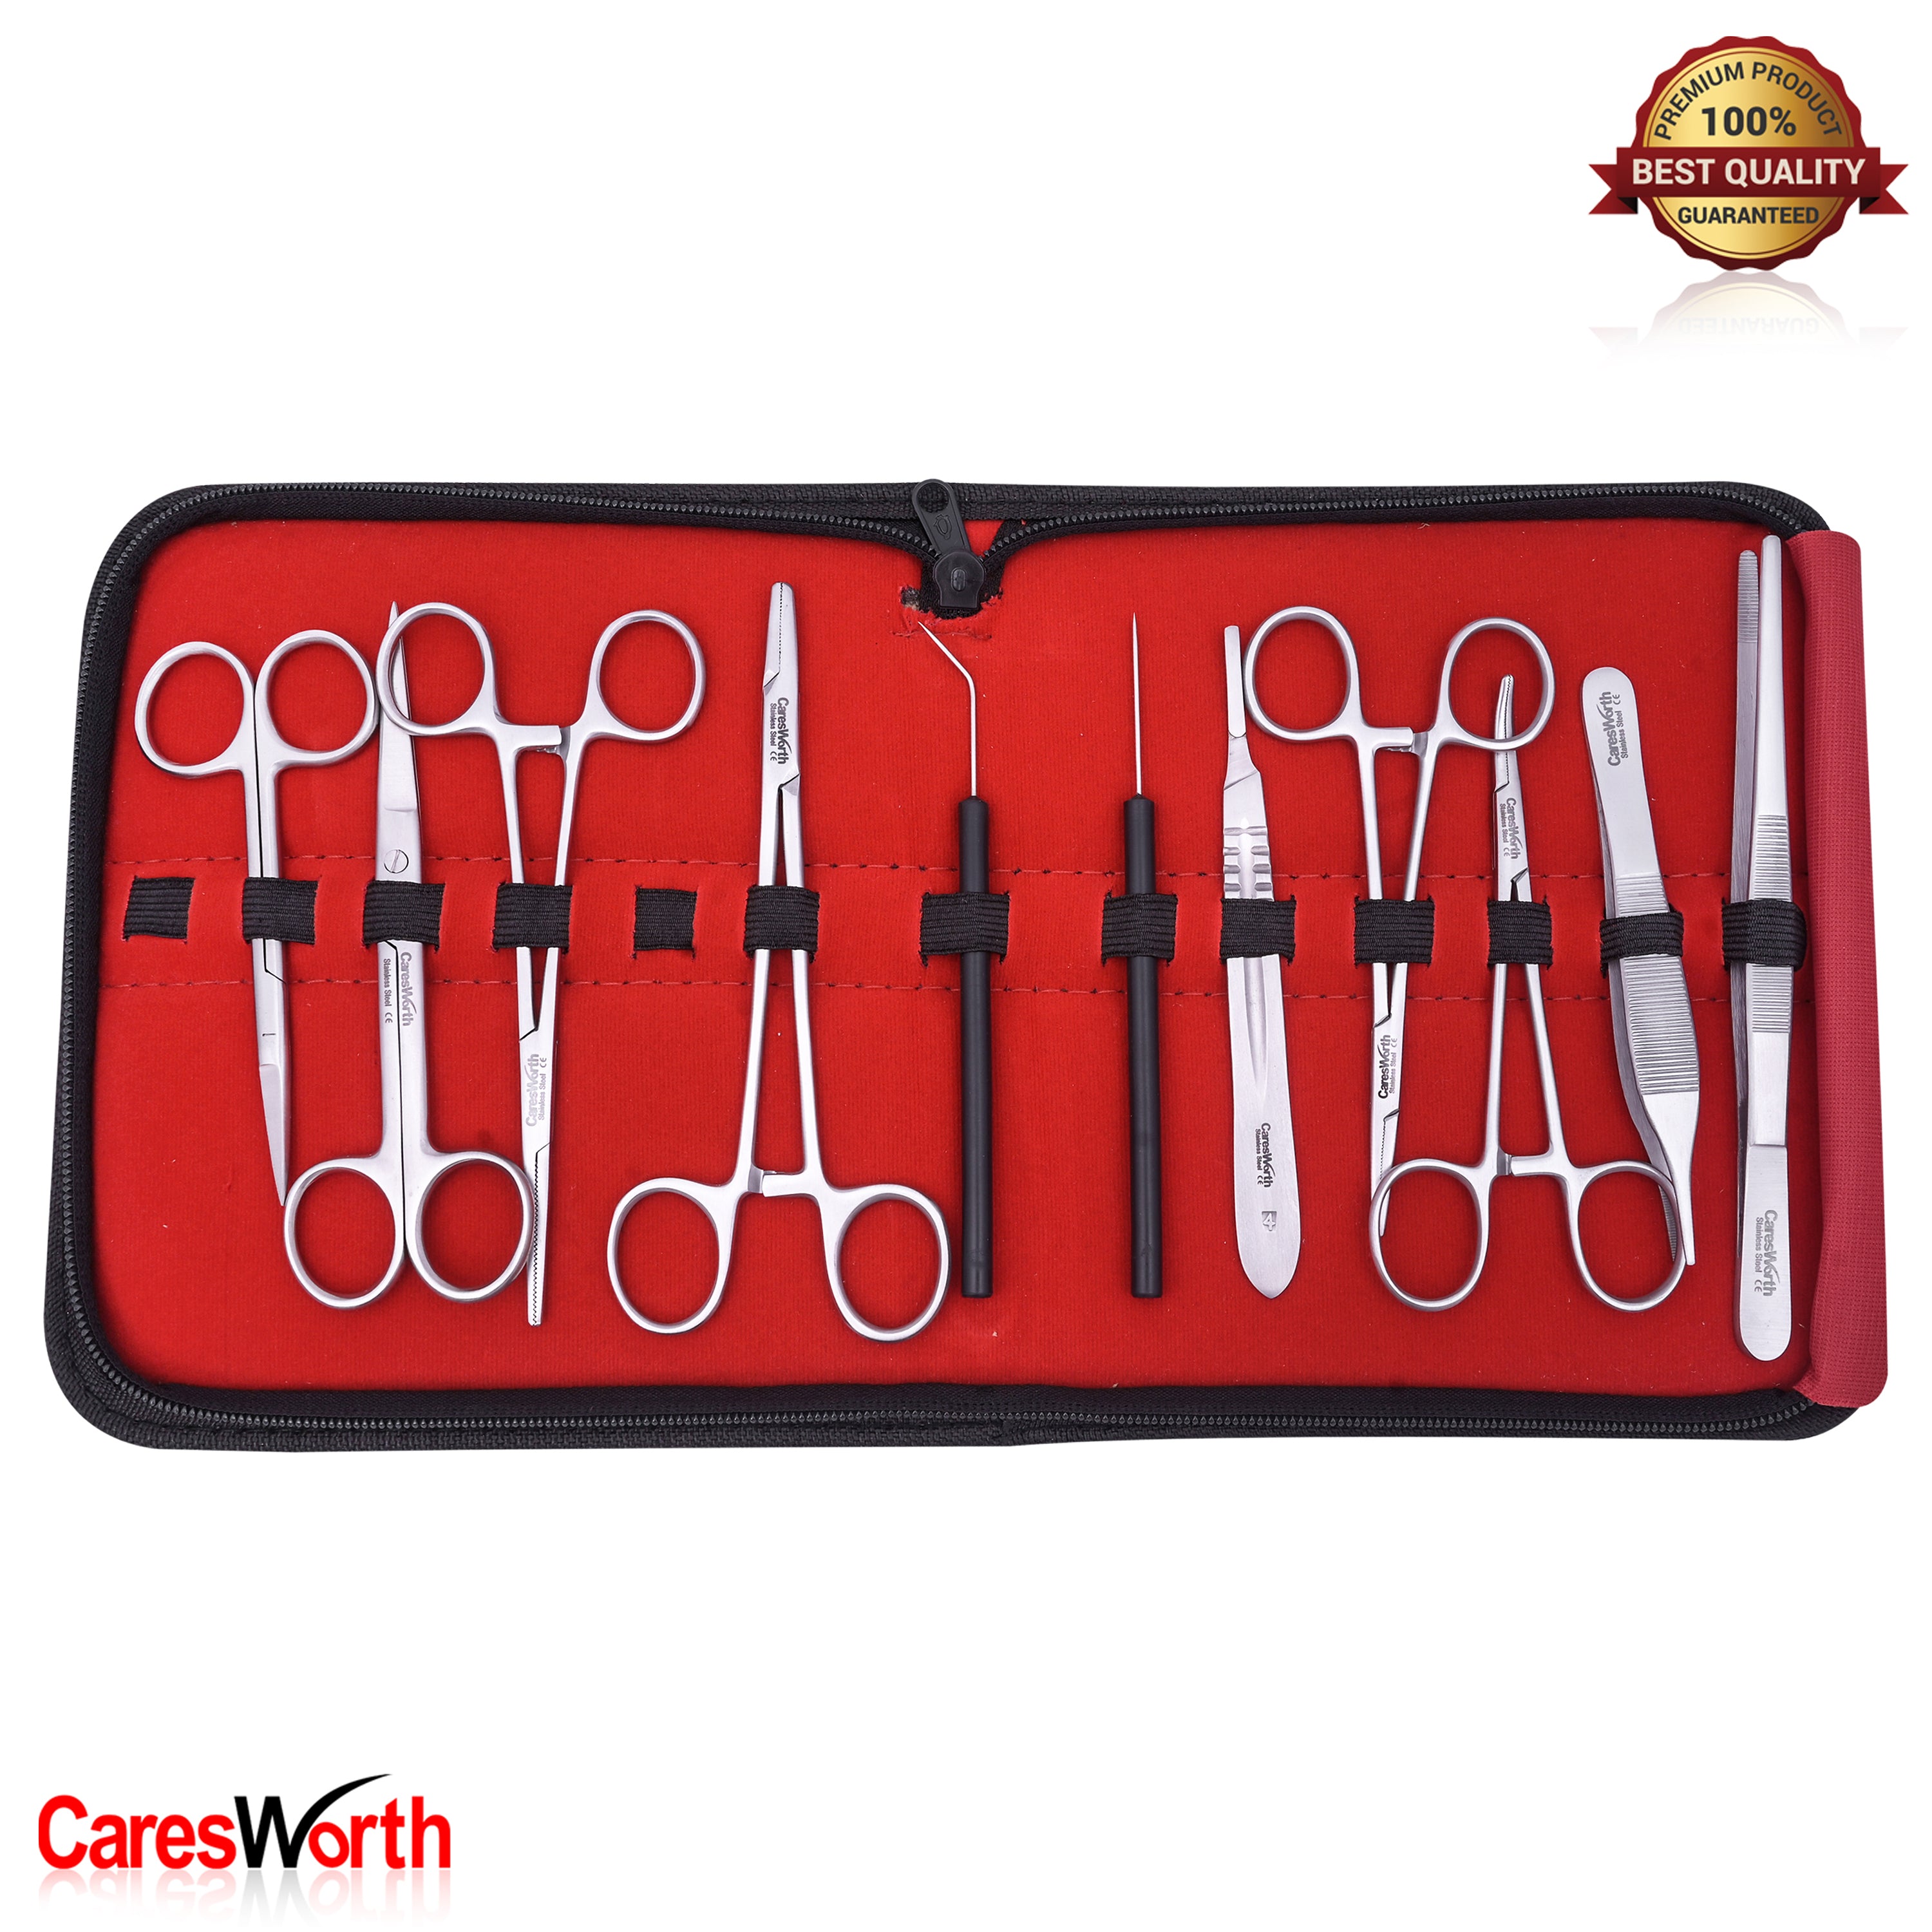 11 Pcs Dissection Kit Pcs Dissection Kit for Beginners, Stainless Steel, Autoclavable, for Biology, Anatomy, Botany, Entomology, Medical and Veterinary Students